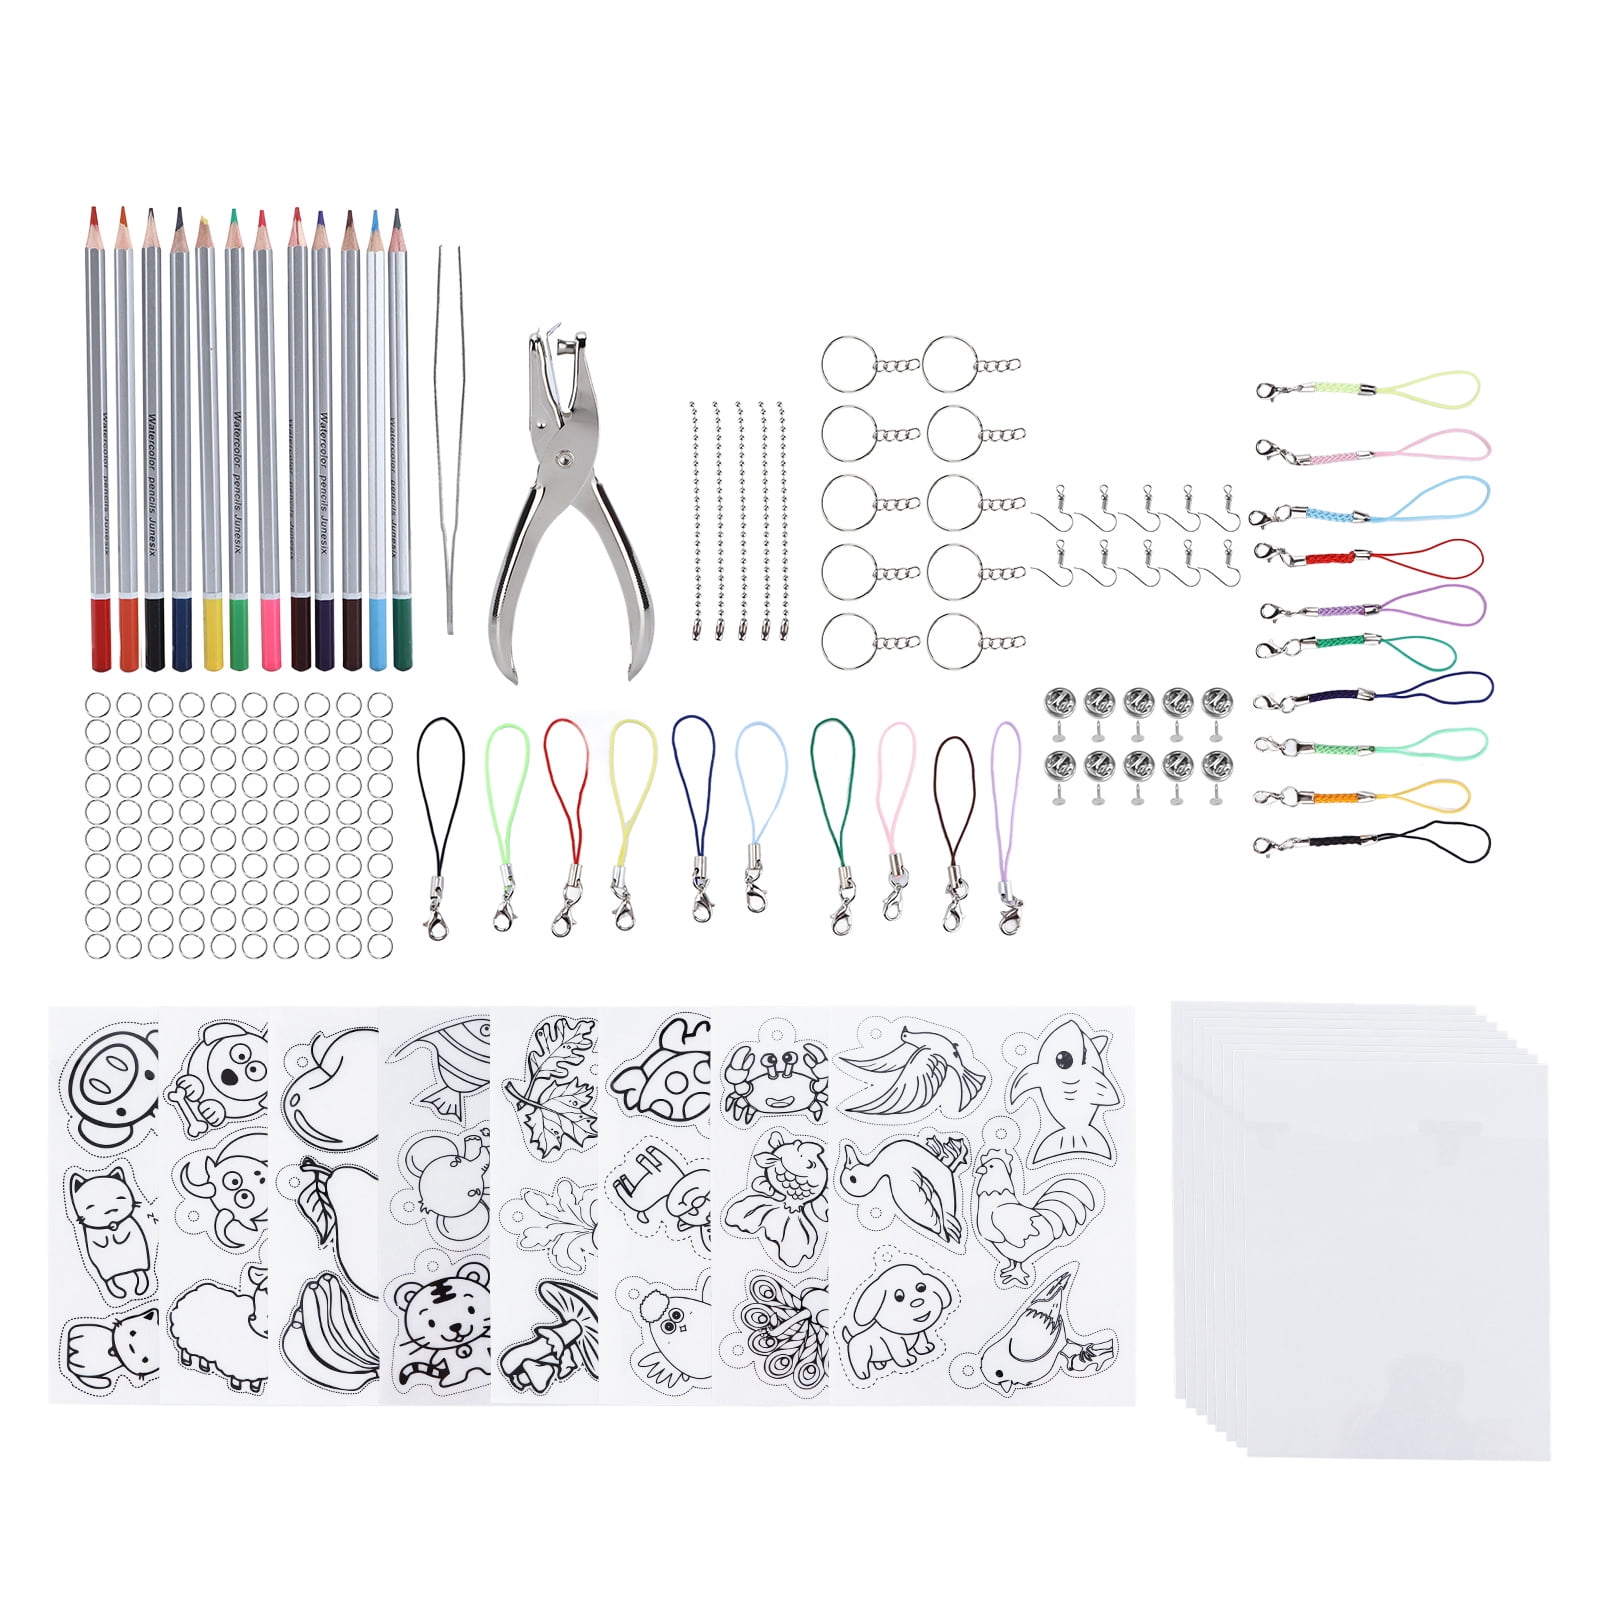 Kozecal Shrinky Dink Paper,20pcs Heat Shrink Sheets Transparent Shrink  Plastic Sheet Kit with Key Rings for Key Chains Jewelry Toys Making  Gift,DIY